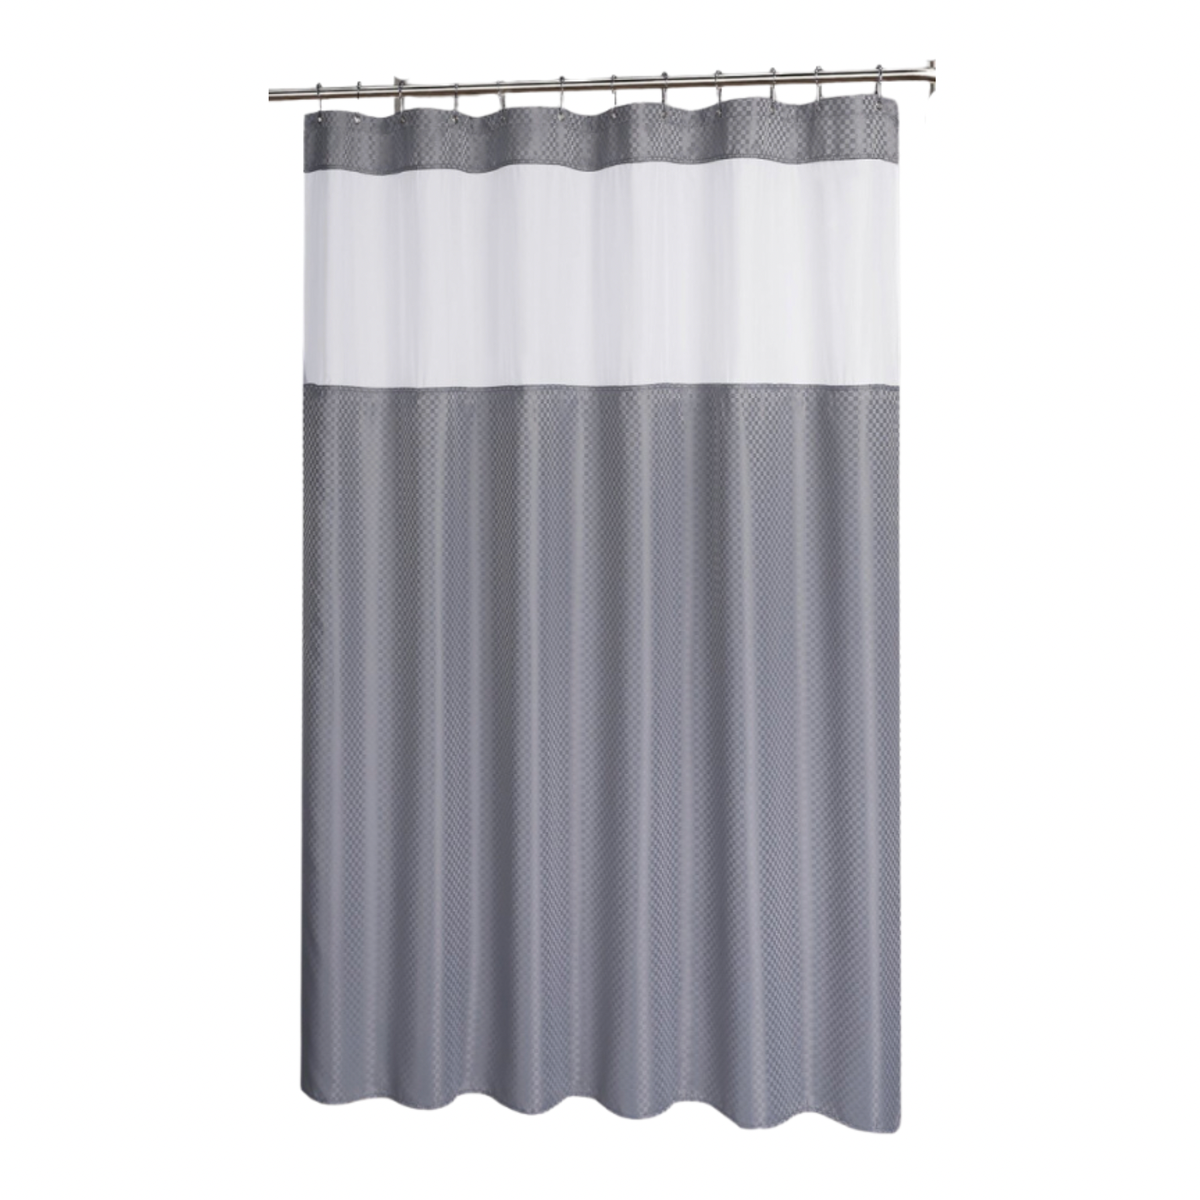 Shower Curtain with Liner & Hooks - 180 x 180cm - Charcoal | Shop Today ...